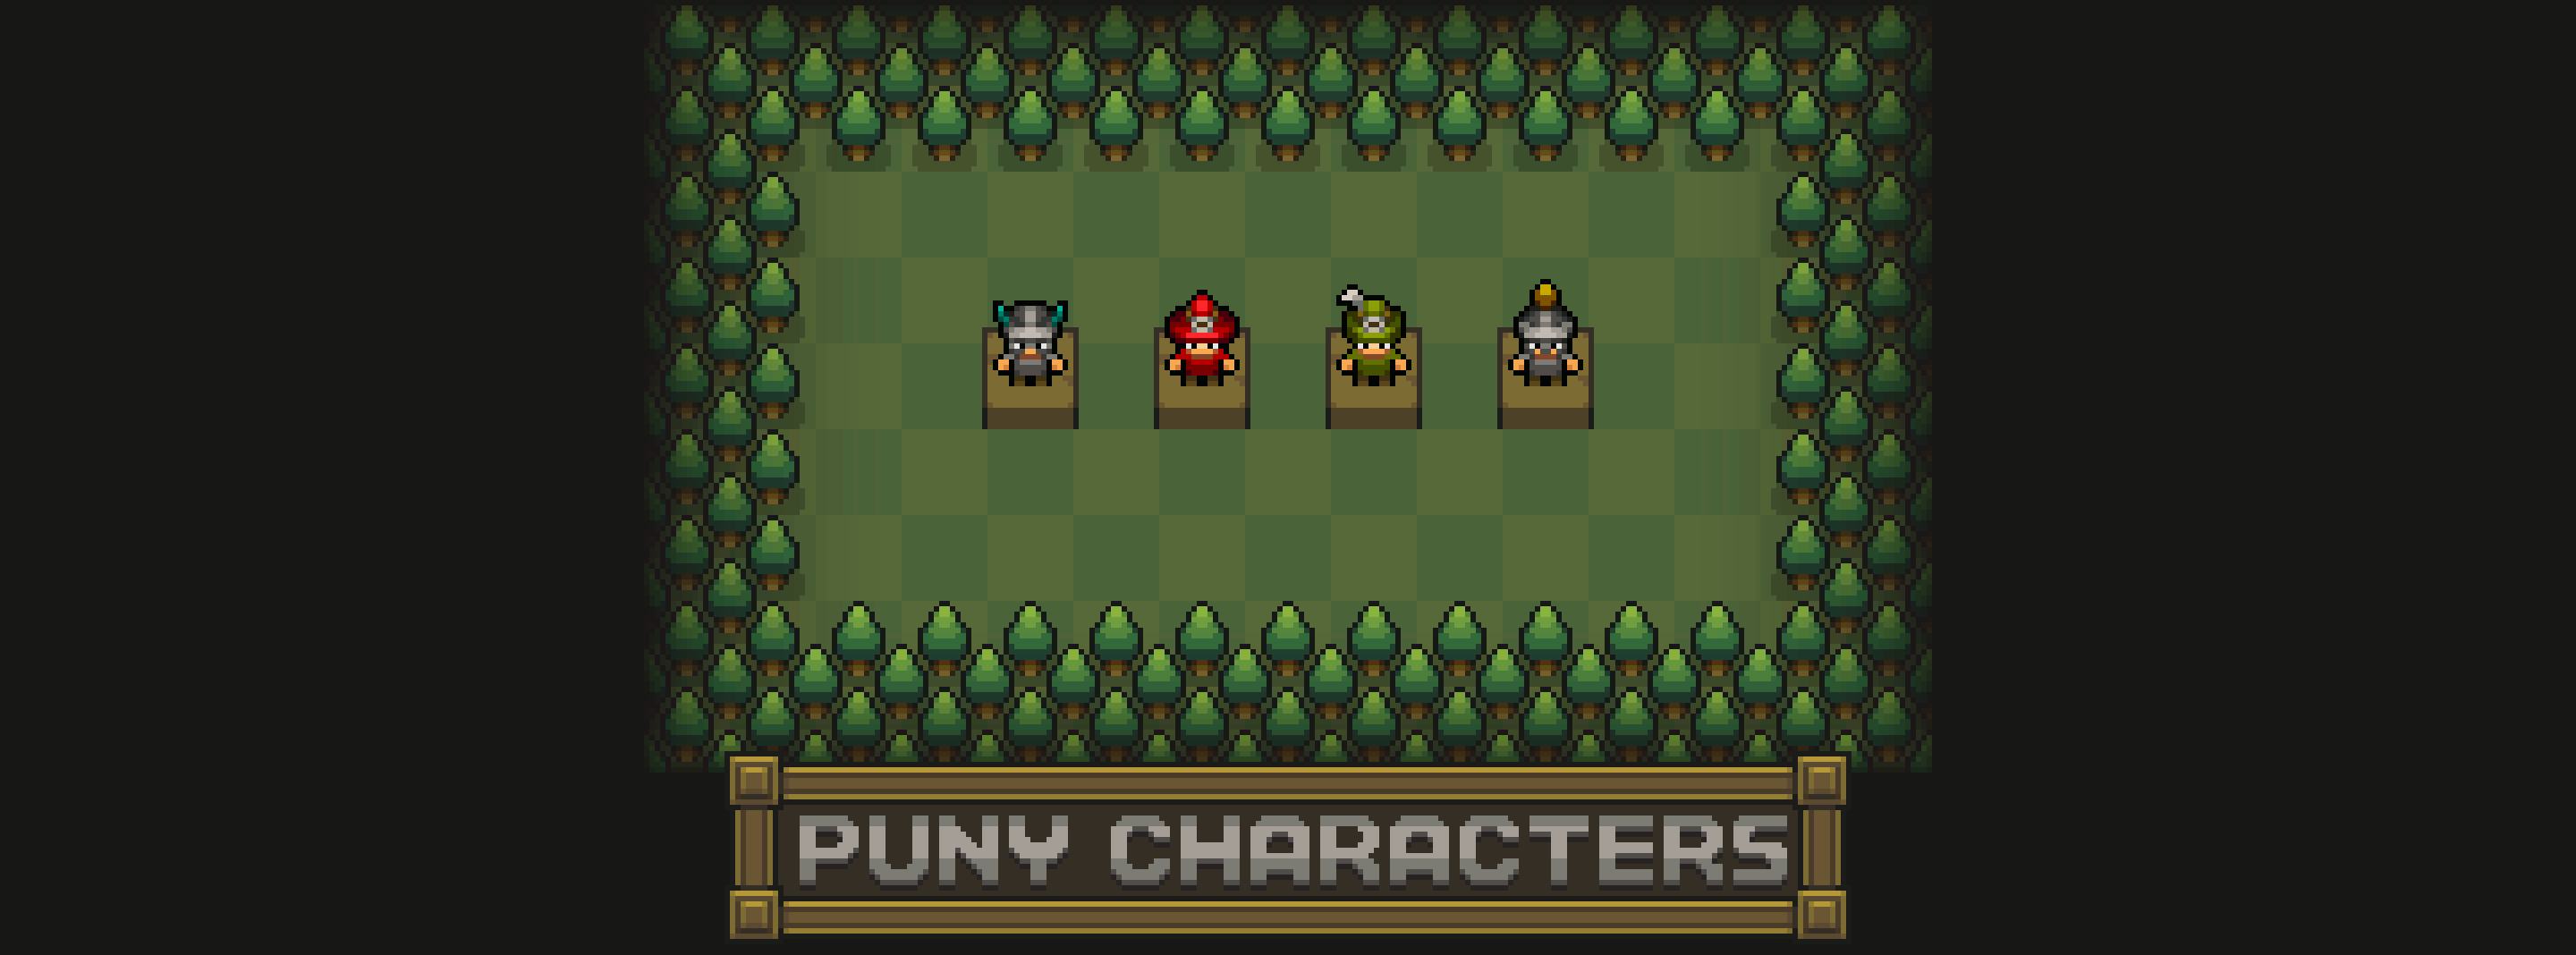 16x16 Puny Characters Editor Edition